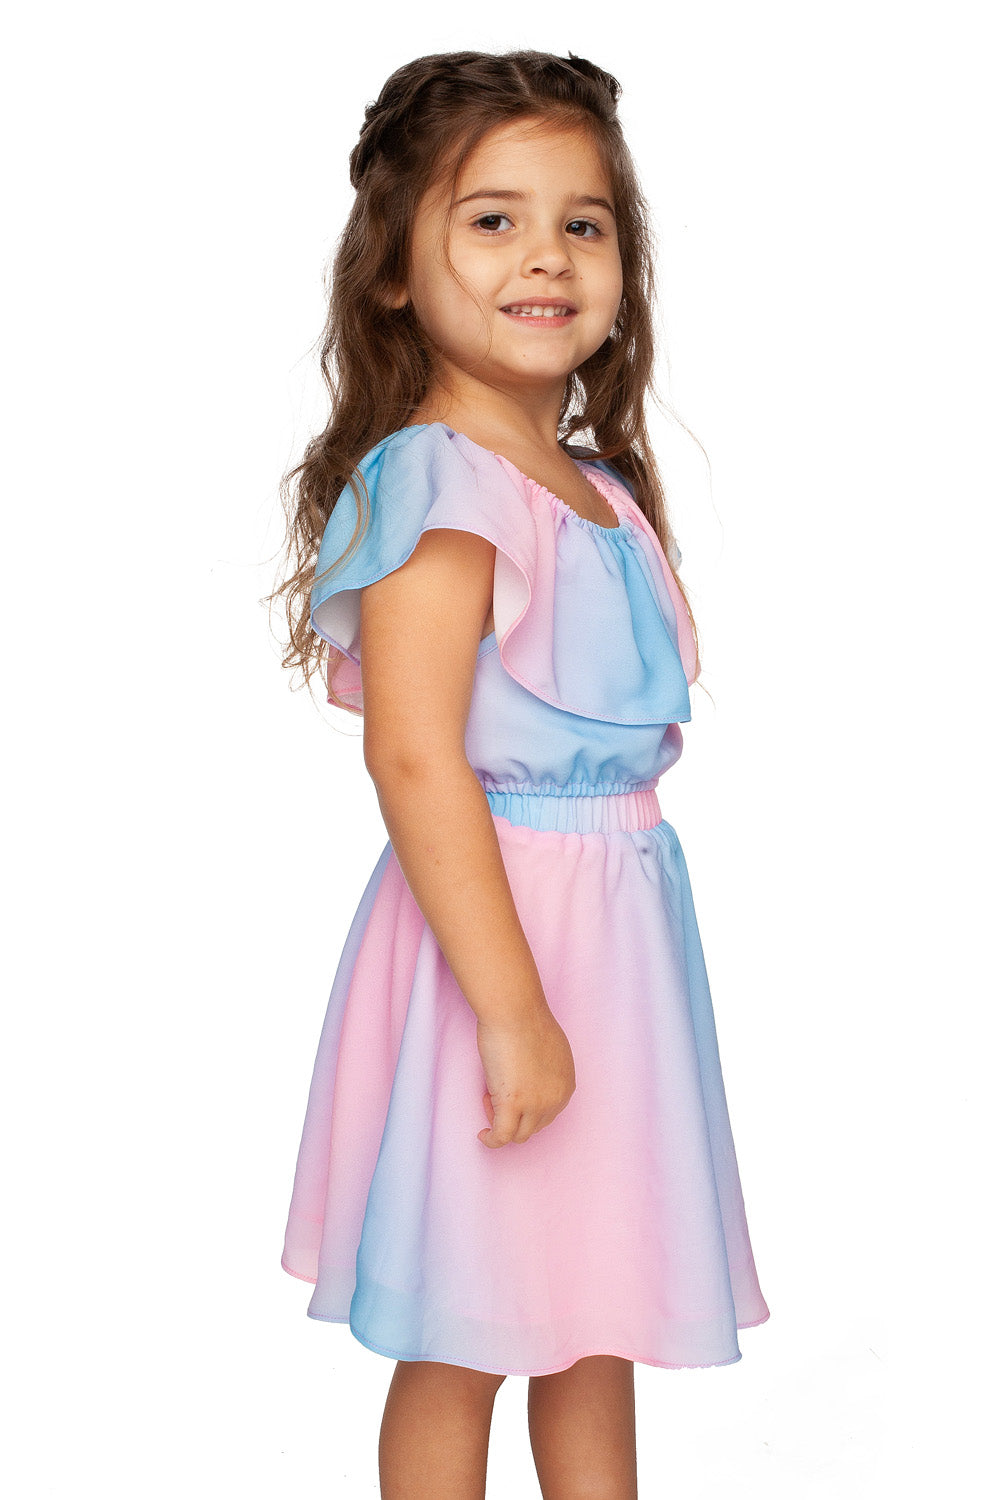 BUDDYLOVE -Little Miss Cotton Candy Mini Top and Skirt